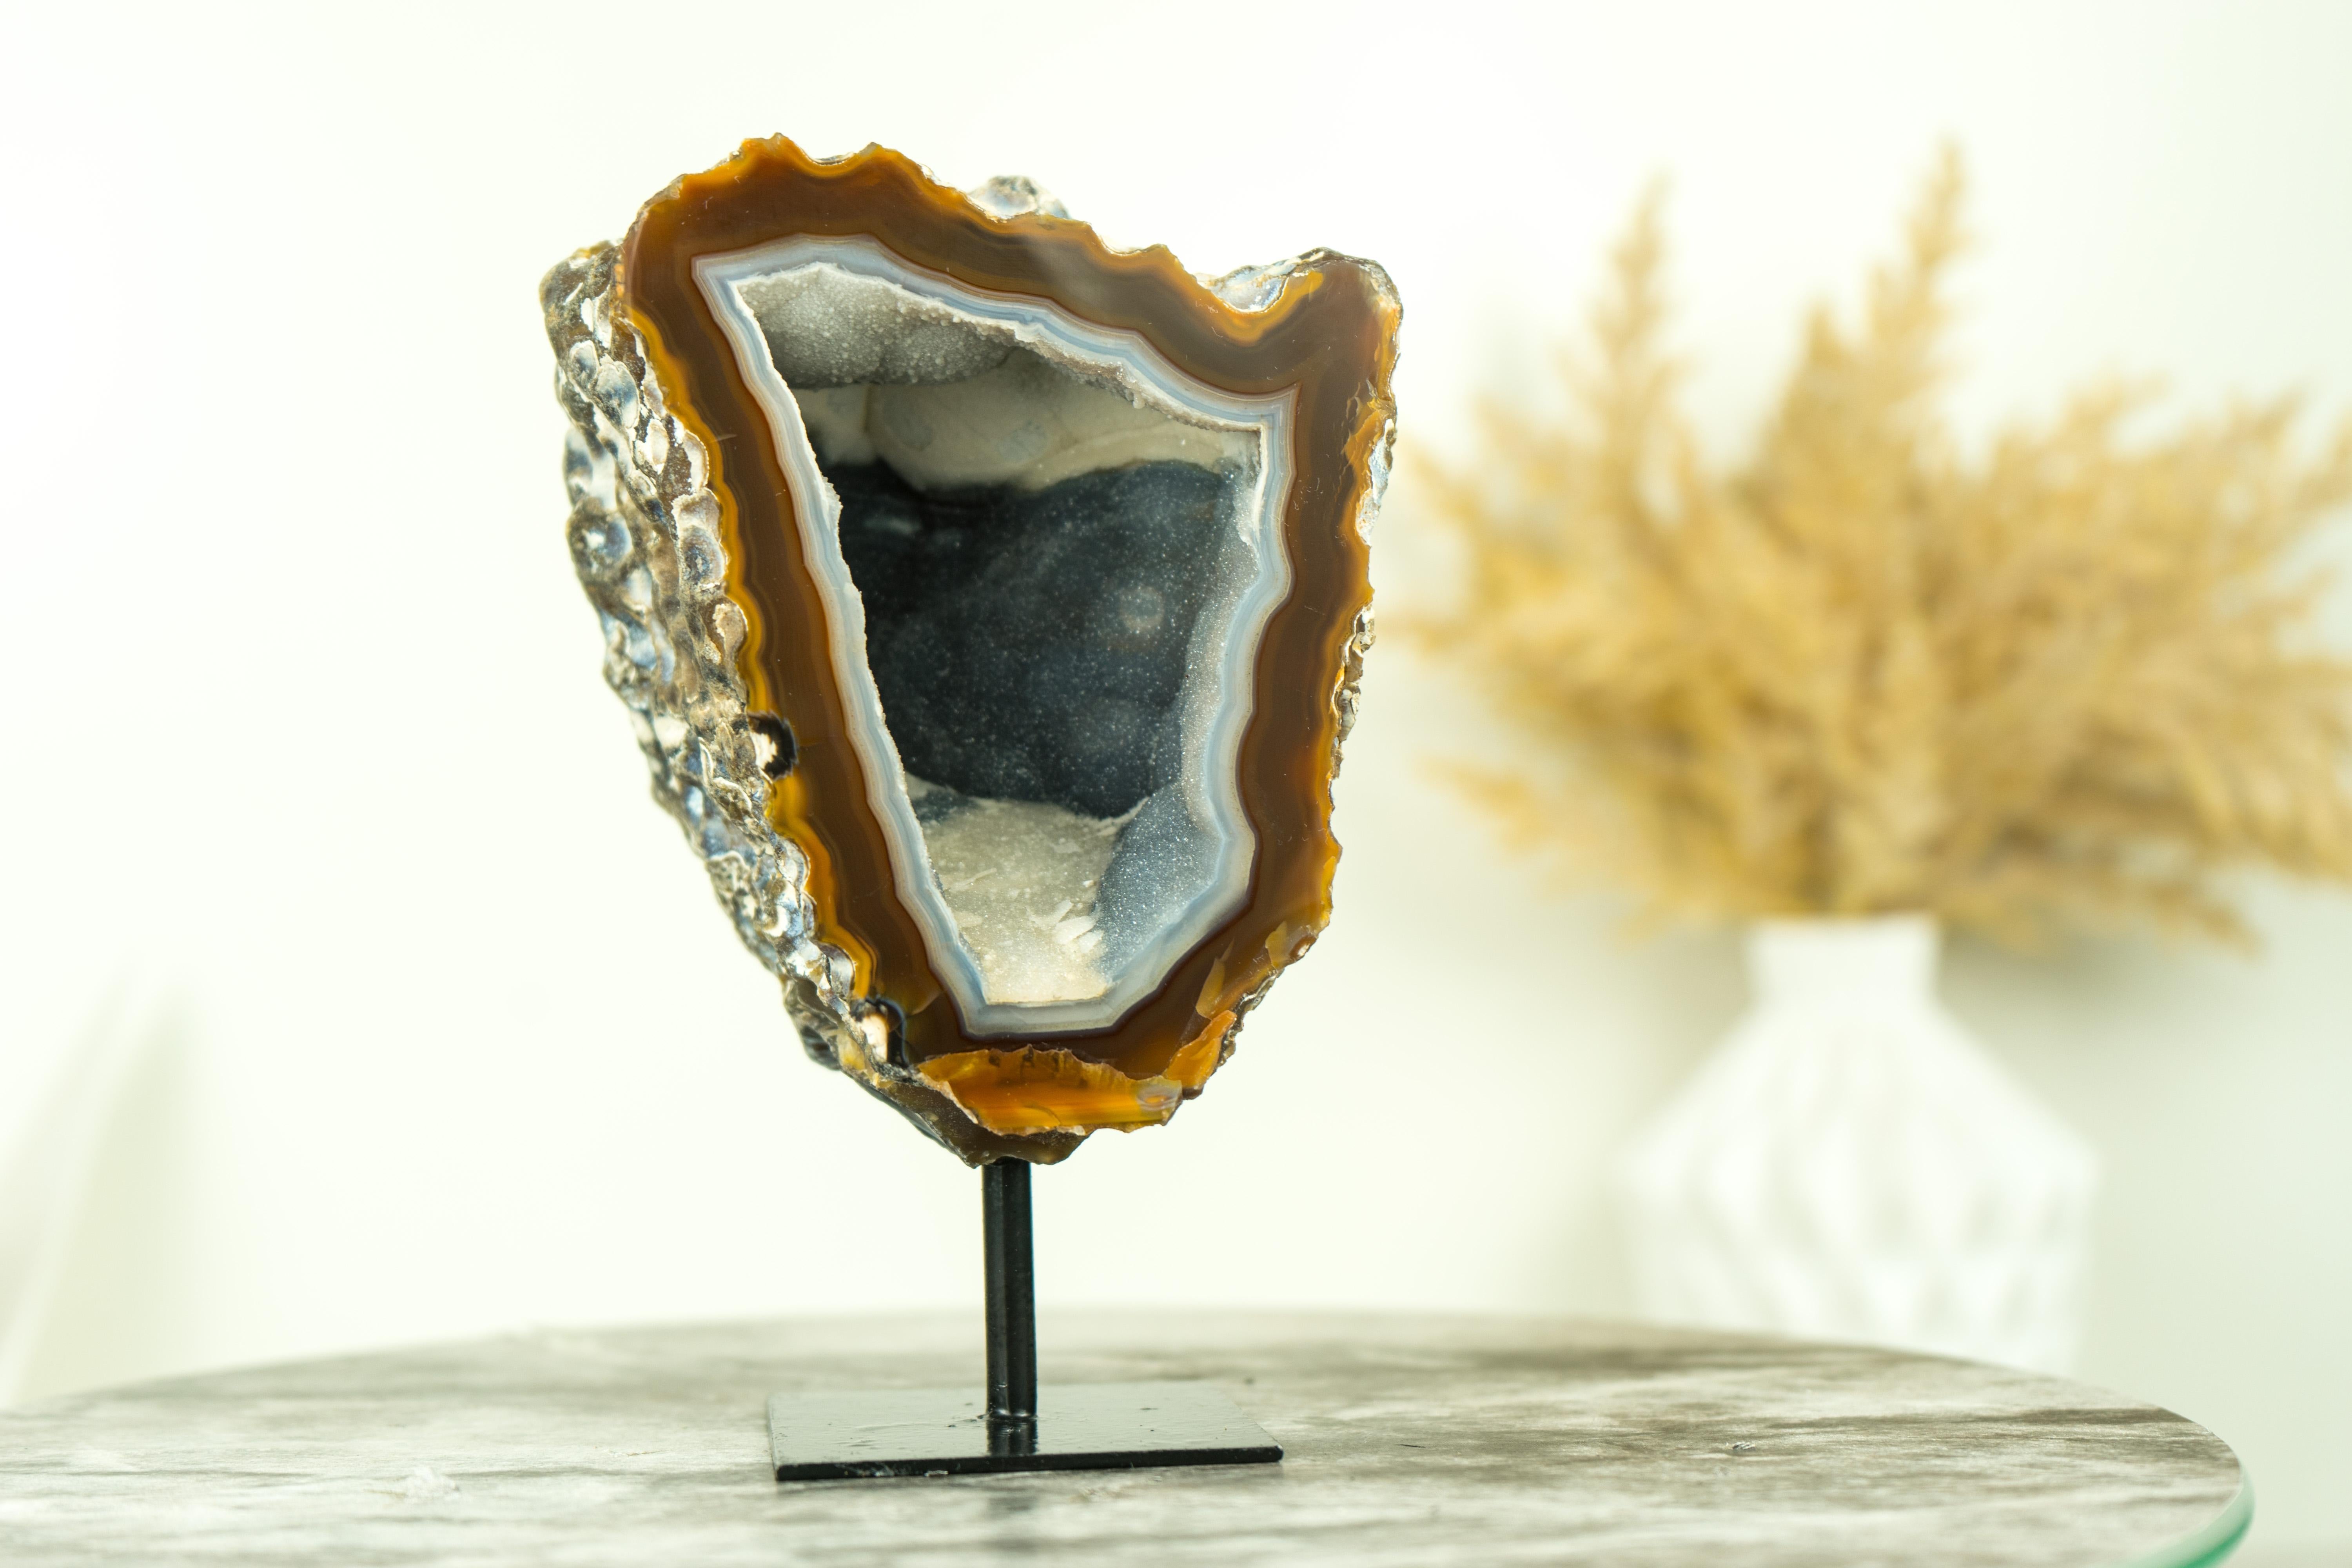 Gallery Grade Amber and White Lace Agate Geode with Blue Galaxy Druzy For Sale 1